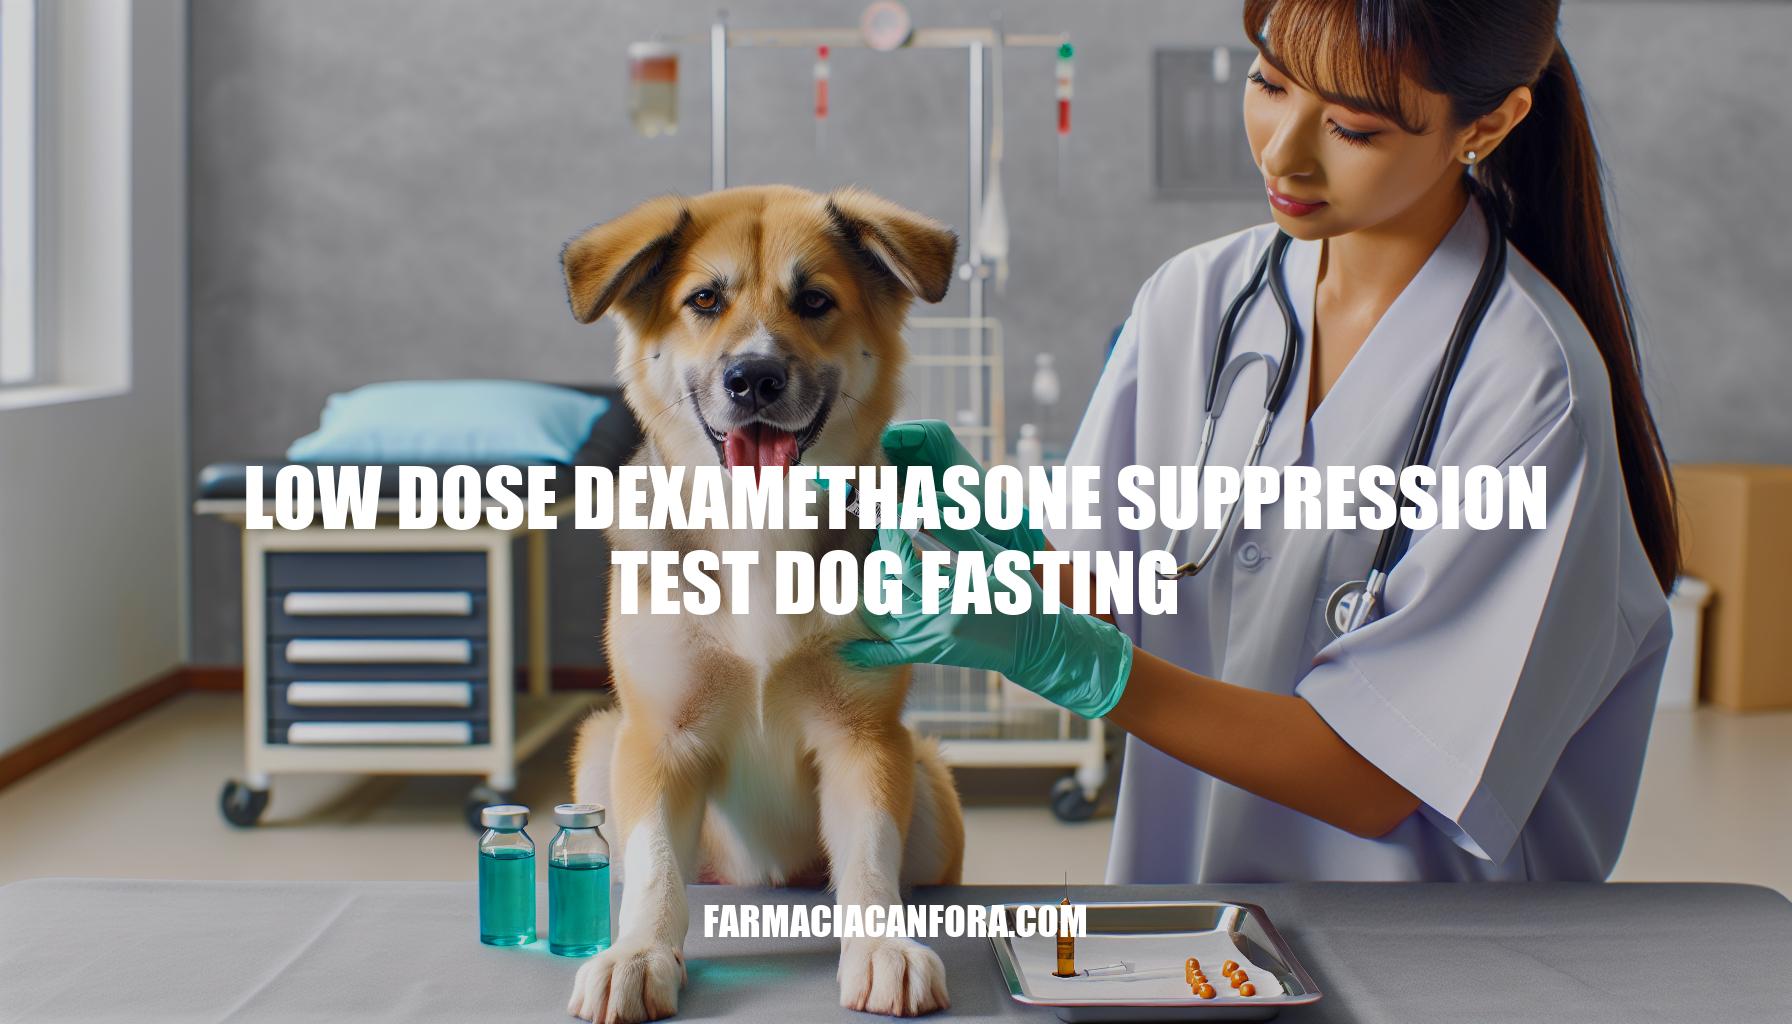 Low Dose Dexamethasone Suppression Test for Dogs Fasting